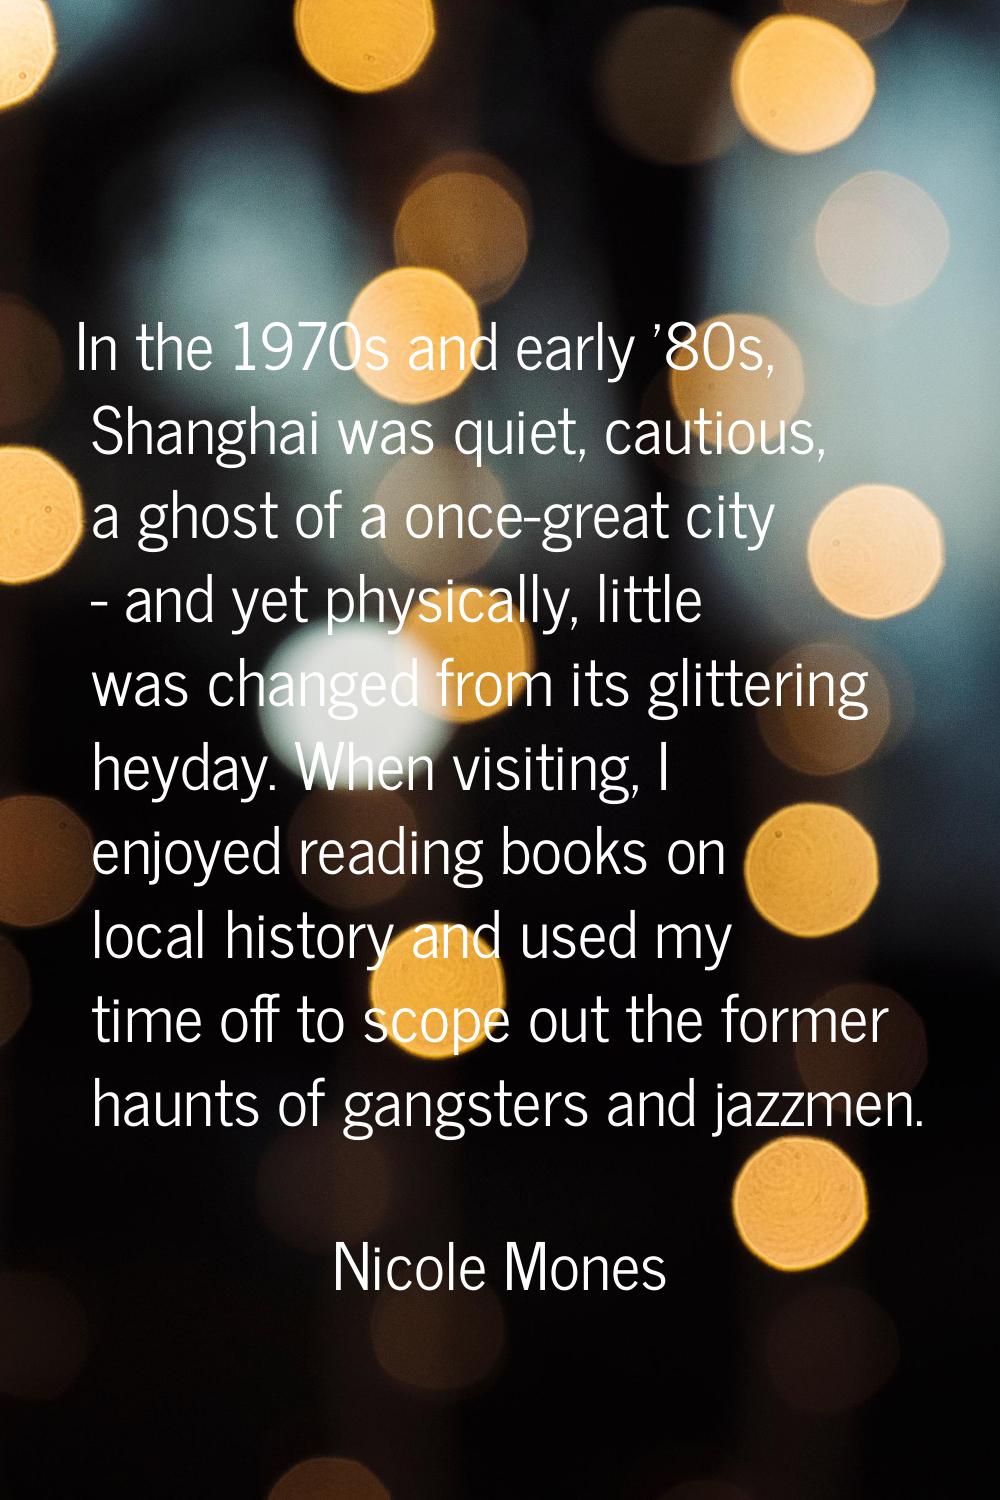 In the 1970s and early '80s, Shanghai was quiet, cautious, a ghost of a once-great city - and yet p